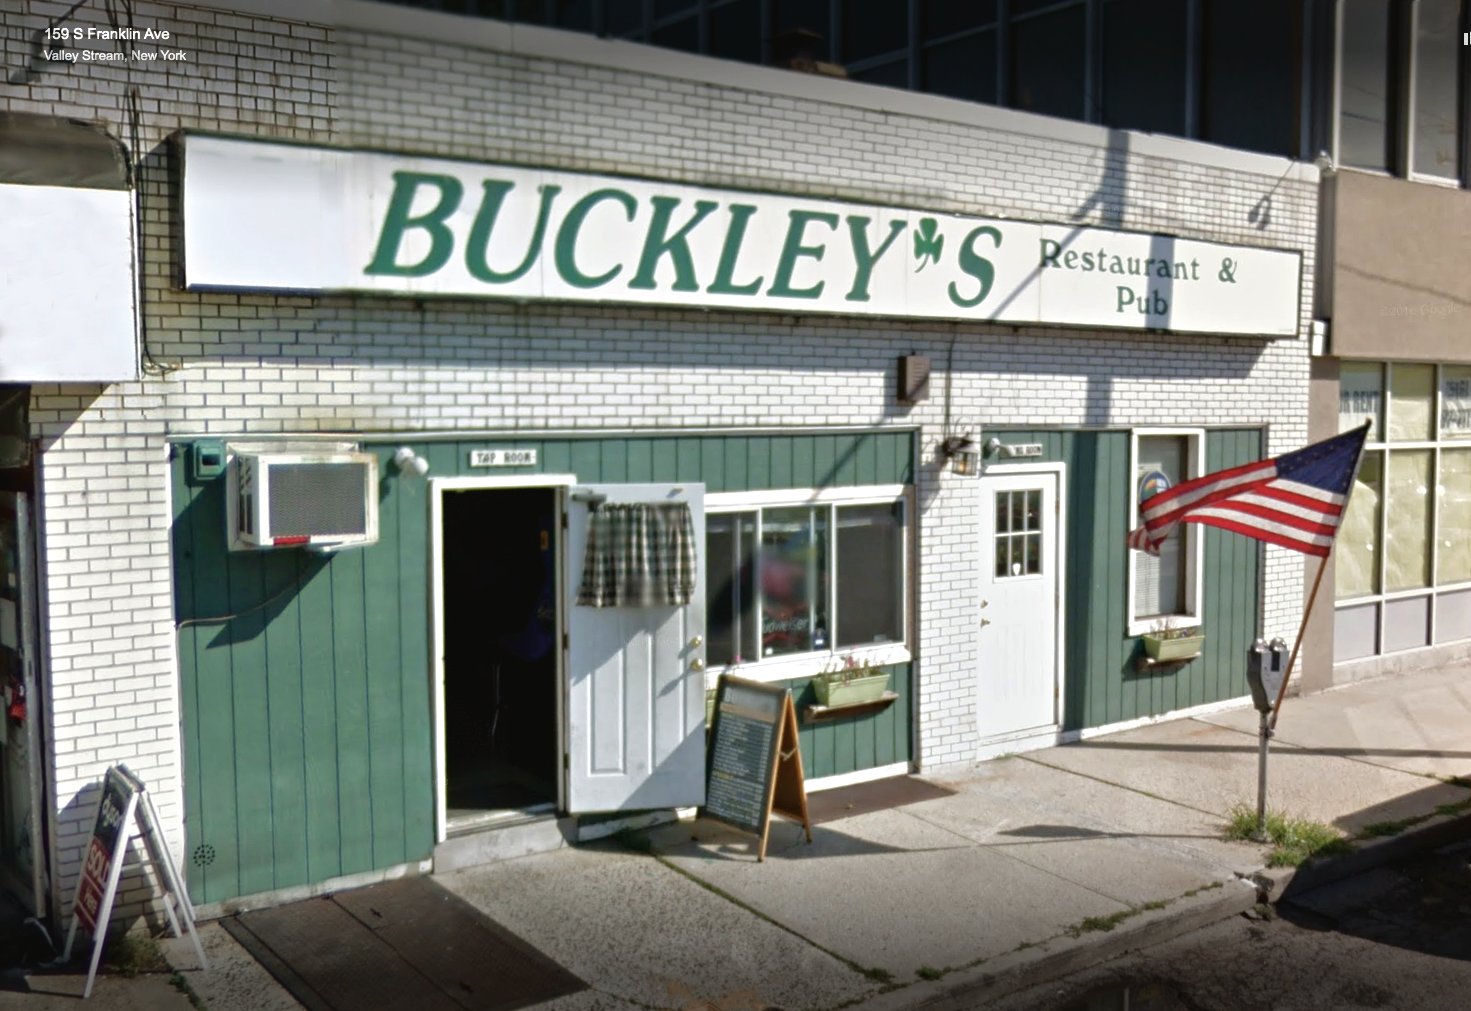 Buckley’s Restaurant and Pub has been a part of the Valley Stream community since 1969.